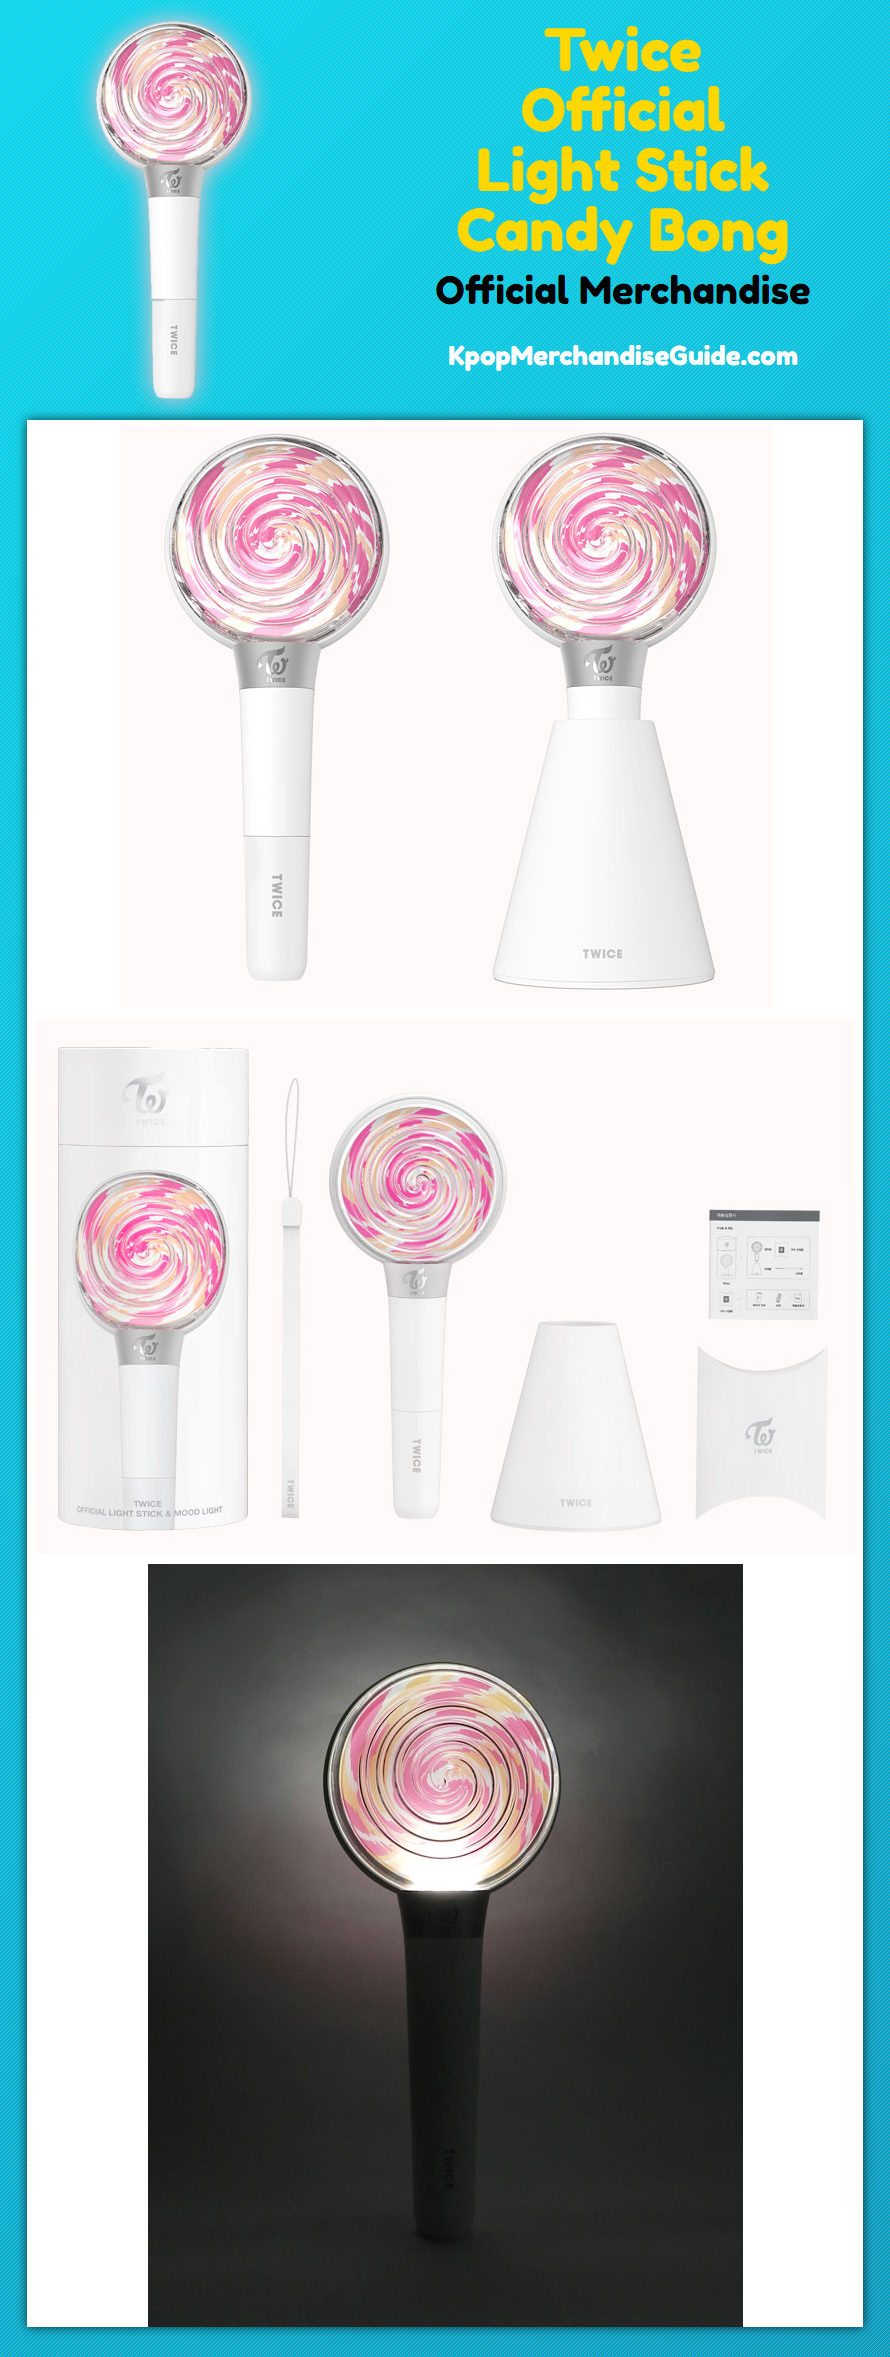 Twice Official Light Stick Candy Bong